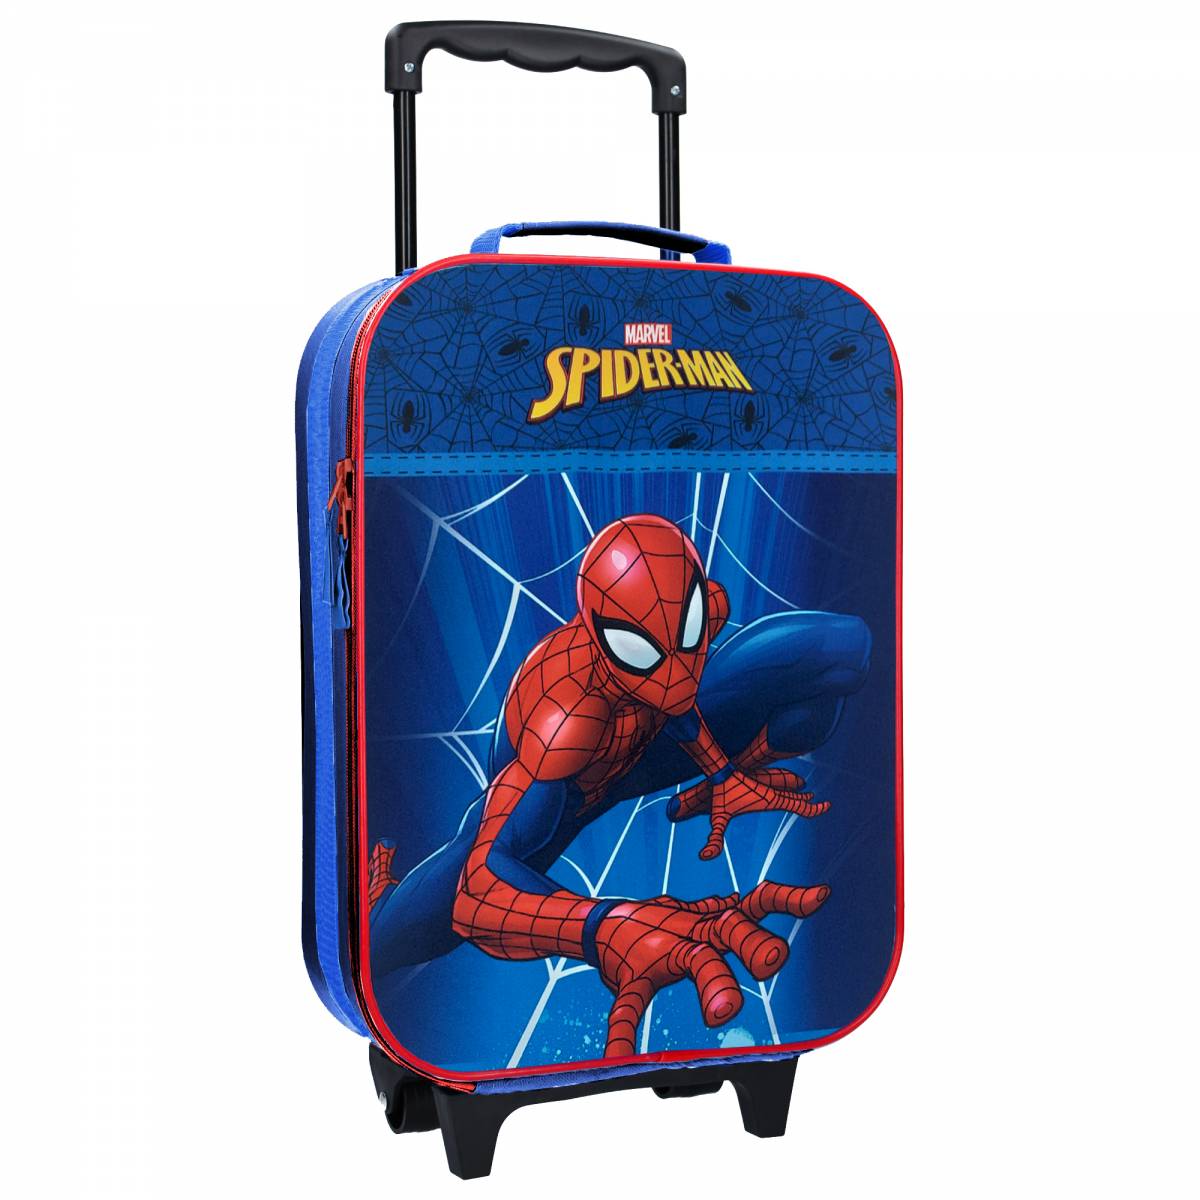 Trolley suitcase Spider-Man Star Of The Show